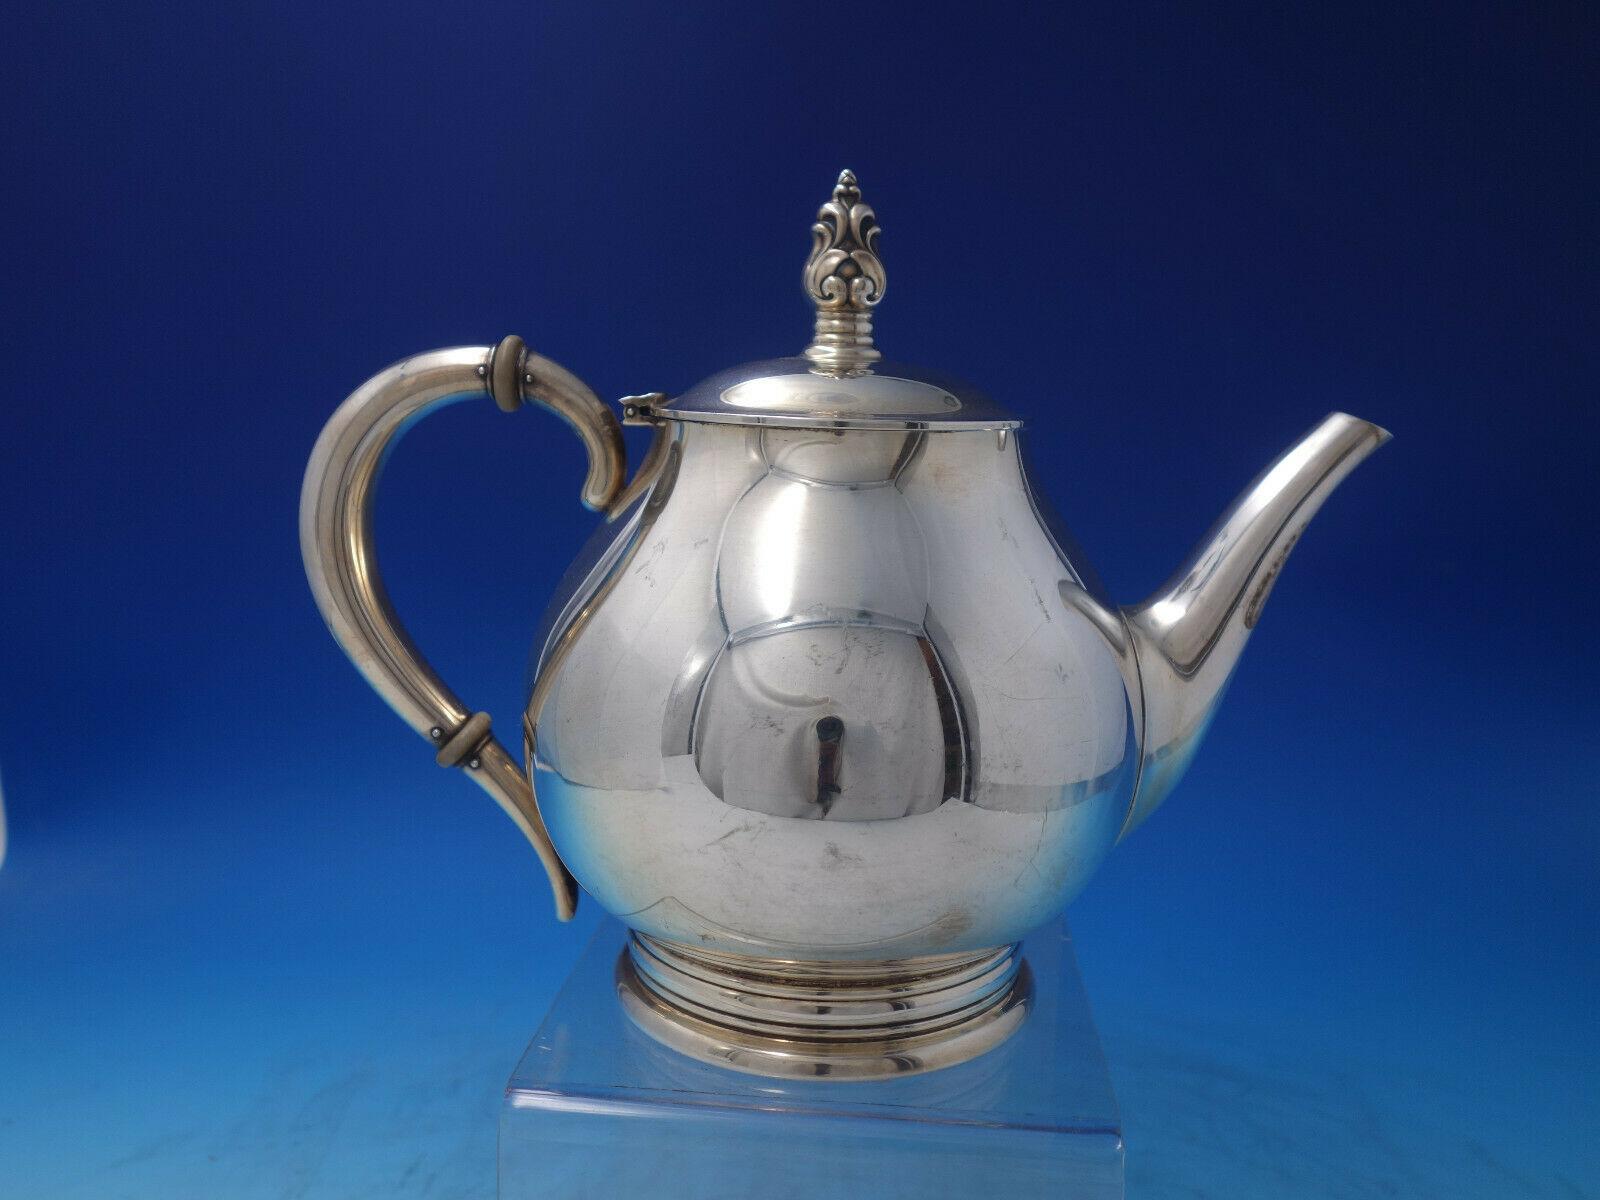 20th Century Royal Danish by International Sterling Silver Tea Set 4-Piece #C353 '#6315' For Sale